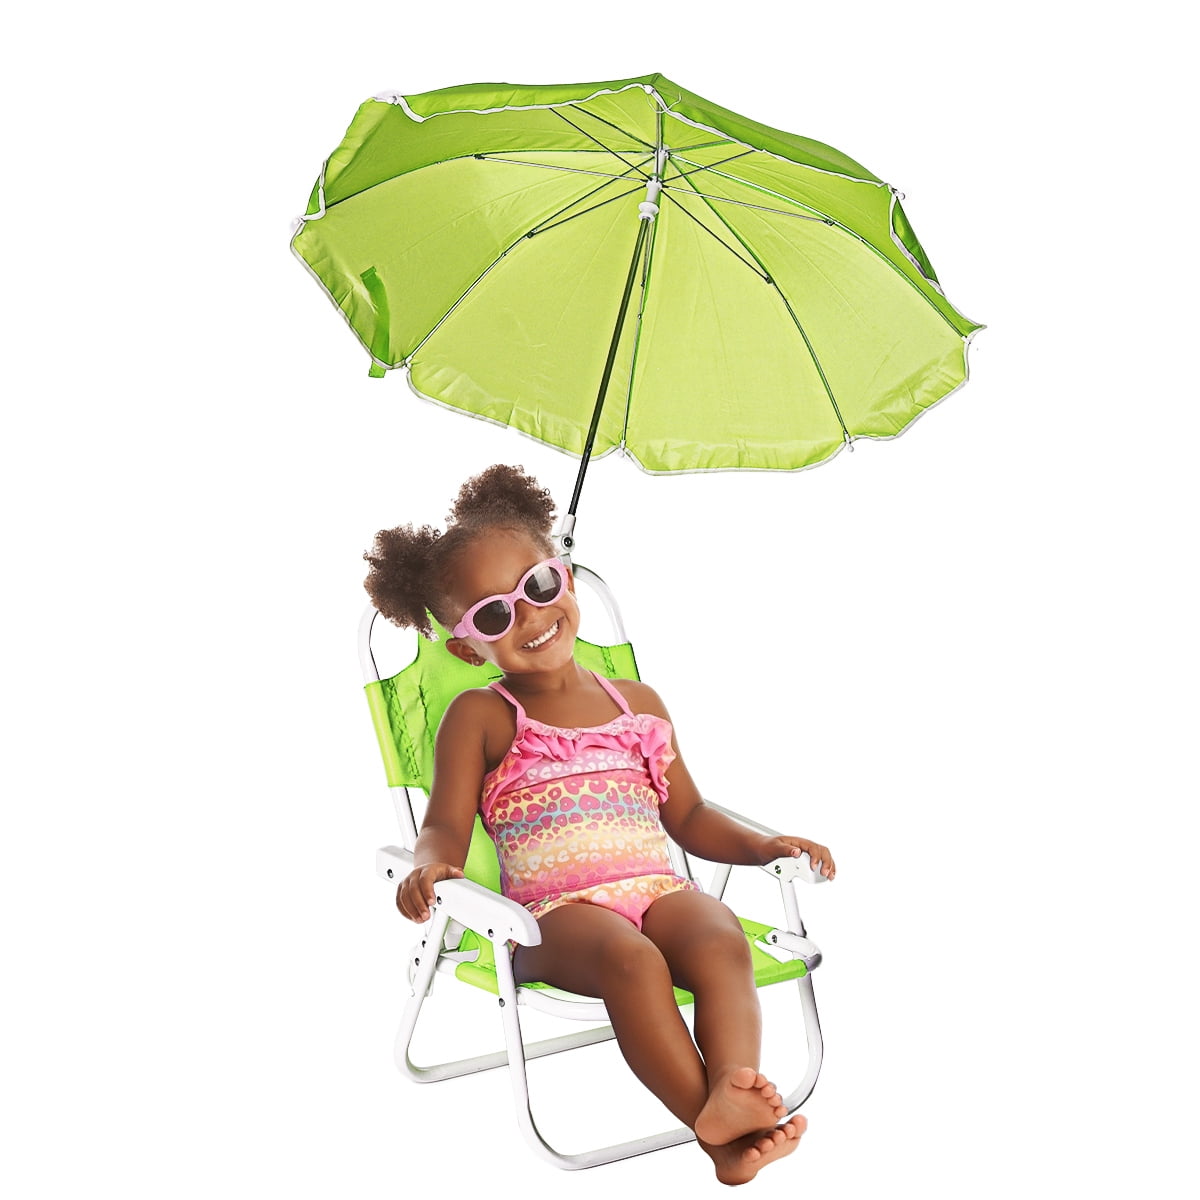 PYLTT Kids Beach Chairs and Umbrellas Outdoor Beach Folding Multifunctional Portable Deck Chairs for Children Outdoor Chairs Kids Furniture 